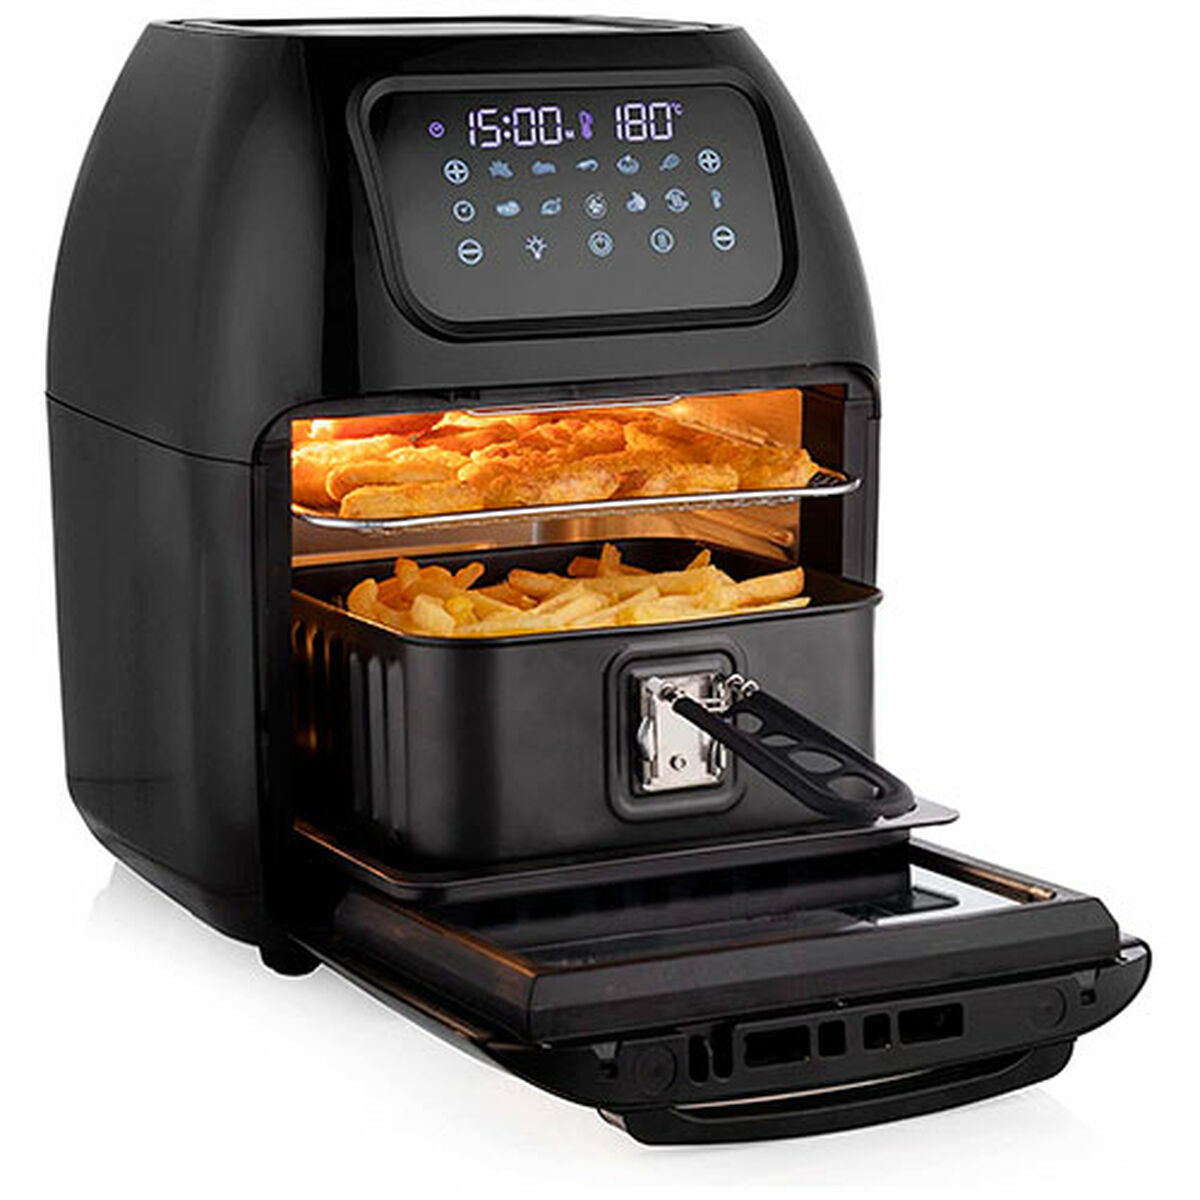 Luchtfriteuse Tristar 1800 W 10 L